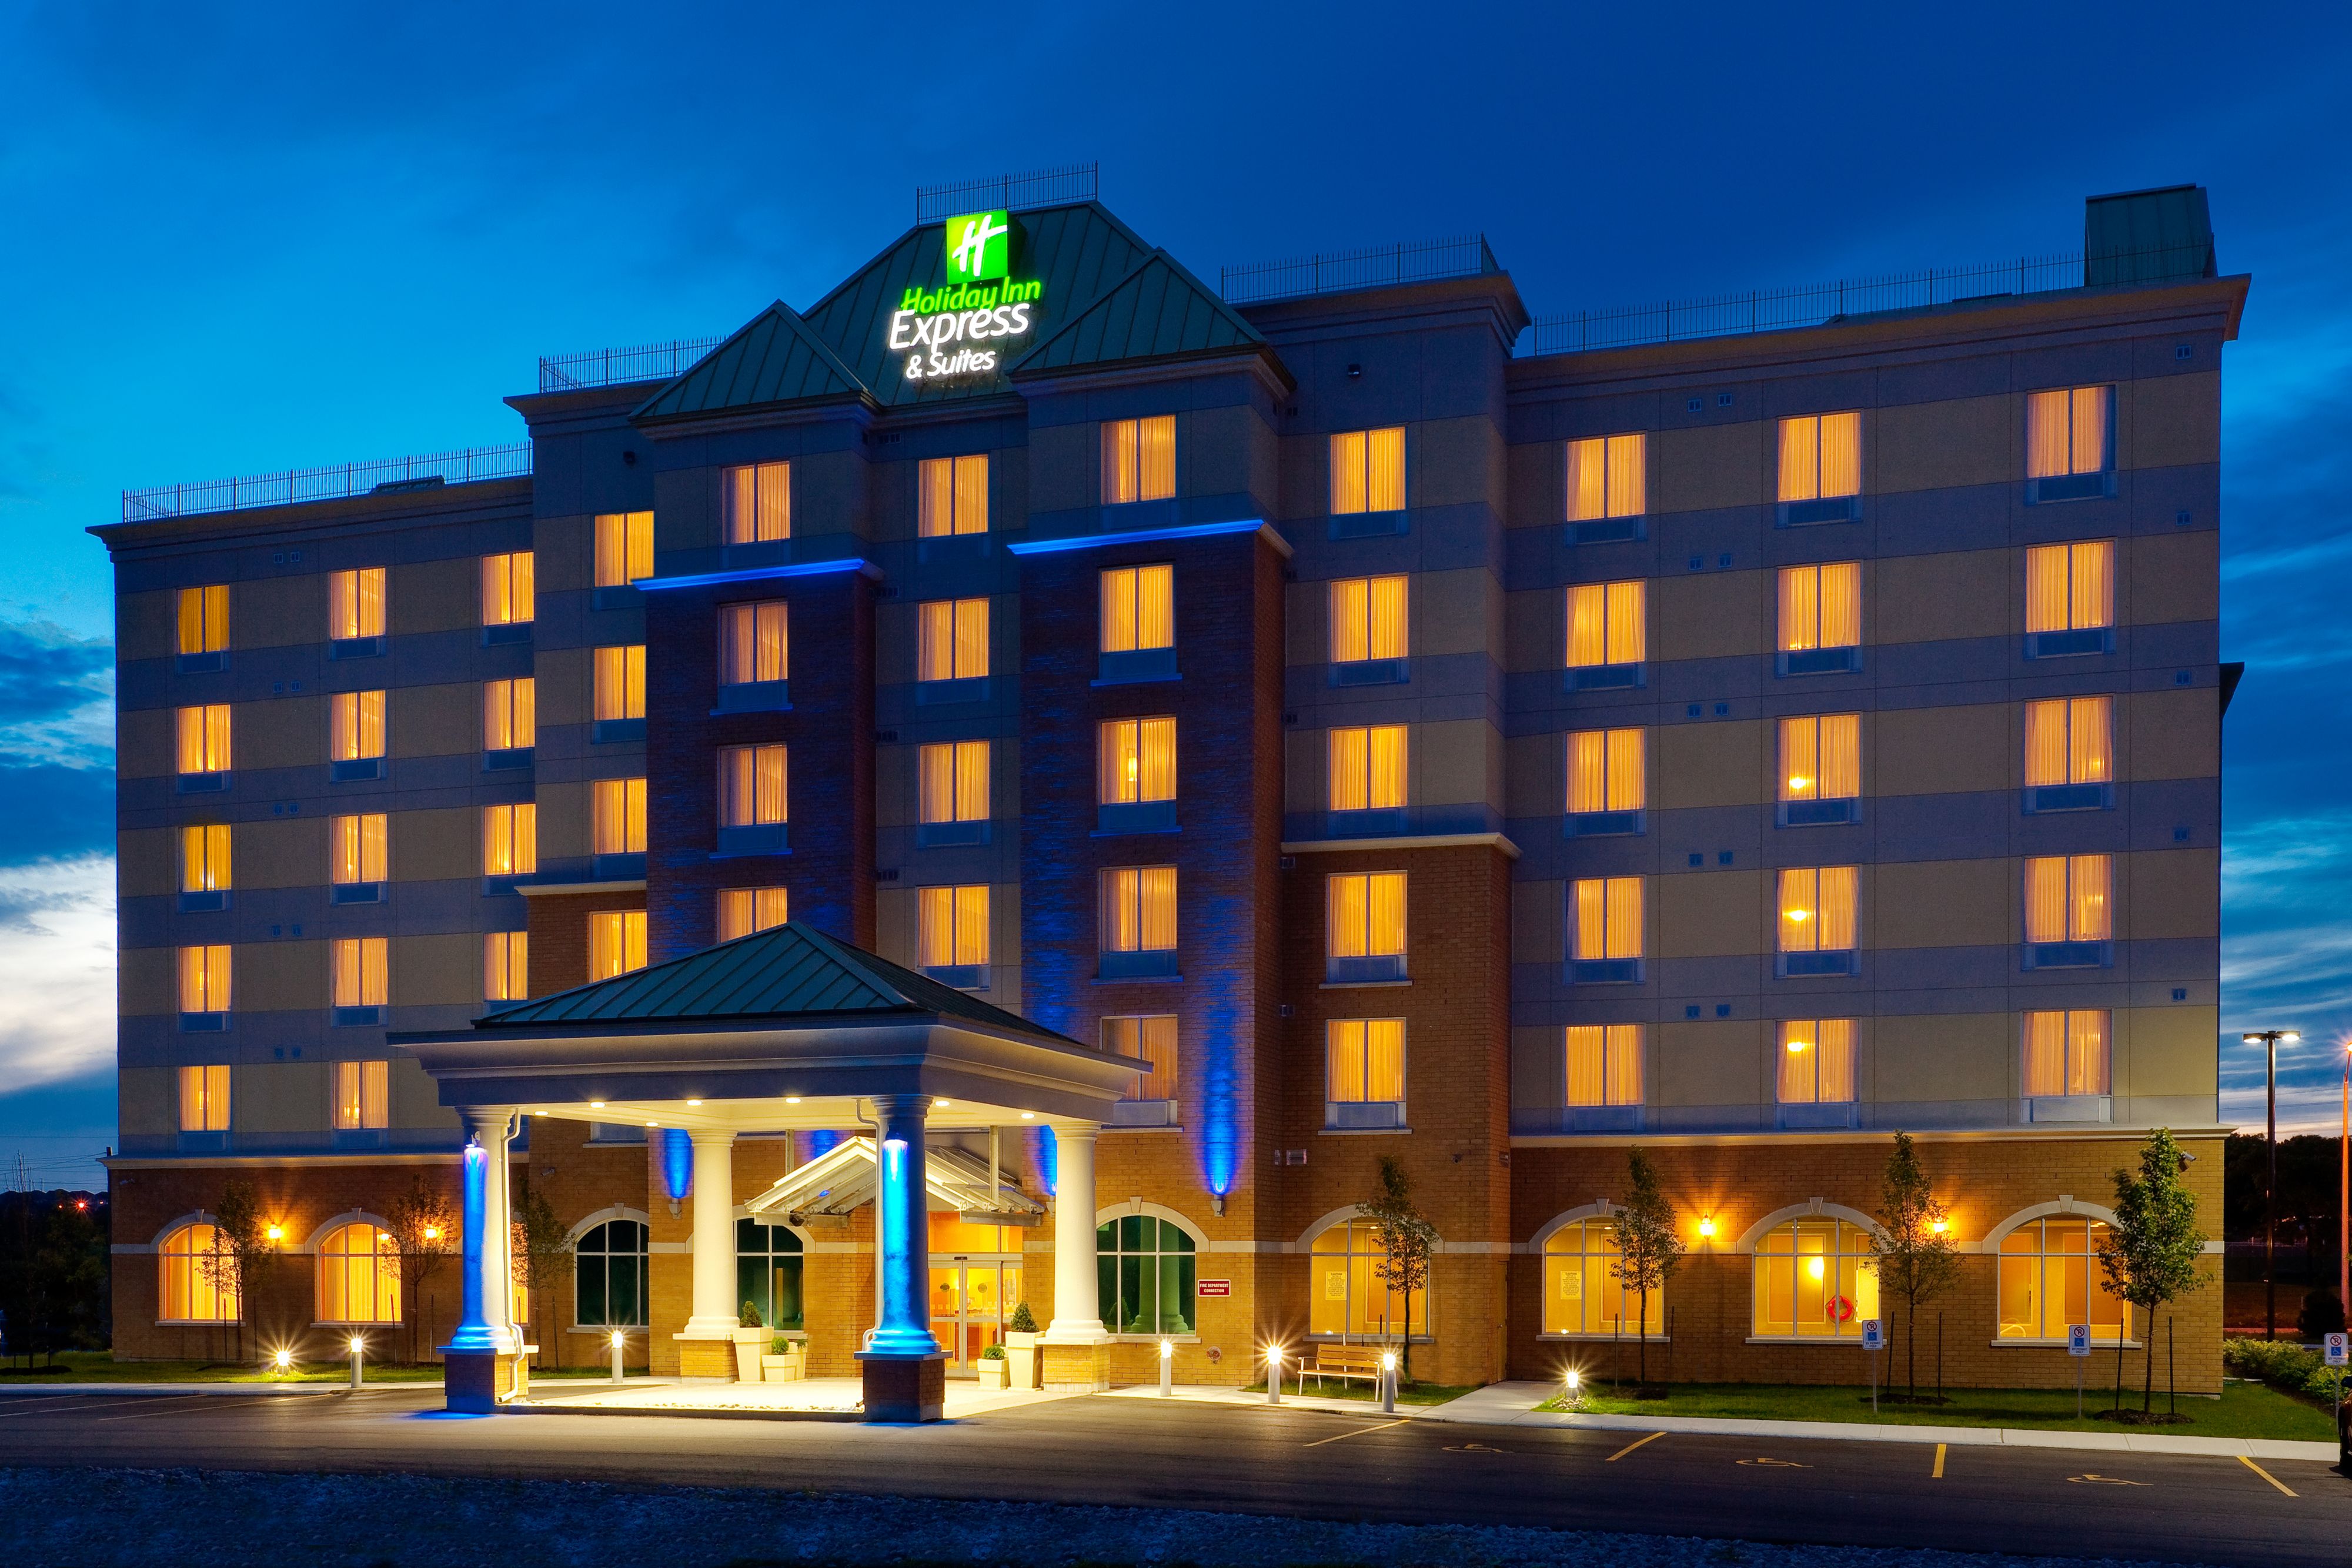 holiday-inn-express-and-suites-bowmanville-4334940399-original.jpg